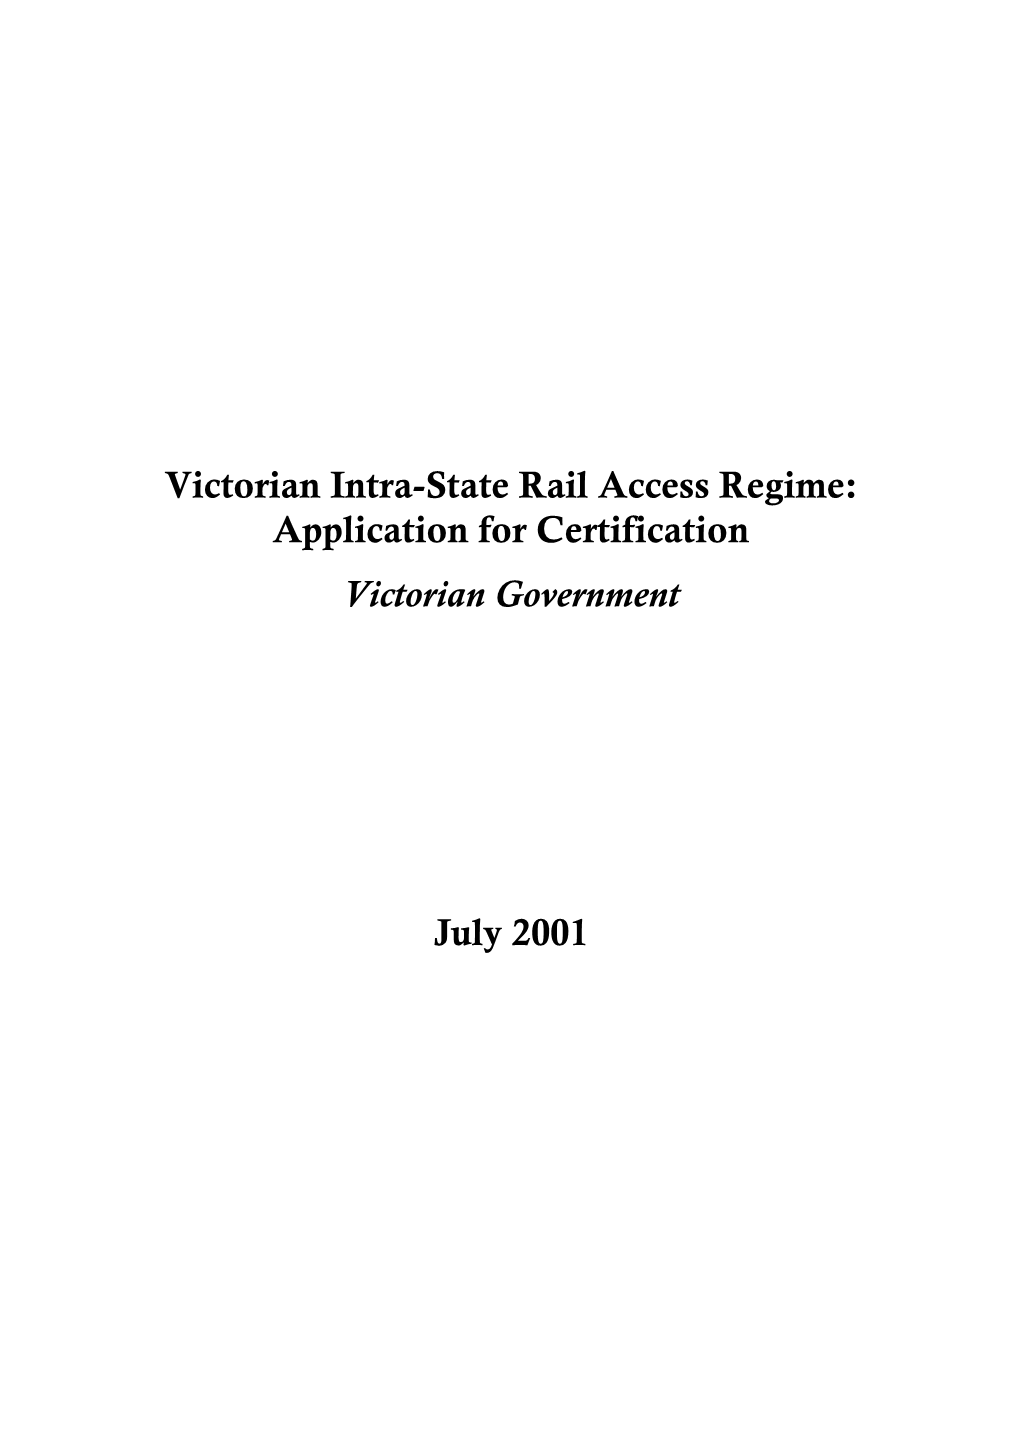 Application for Certification of the Victorian Intra-State Rail Access